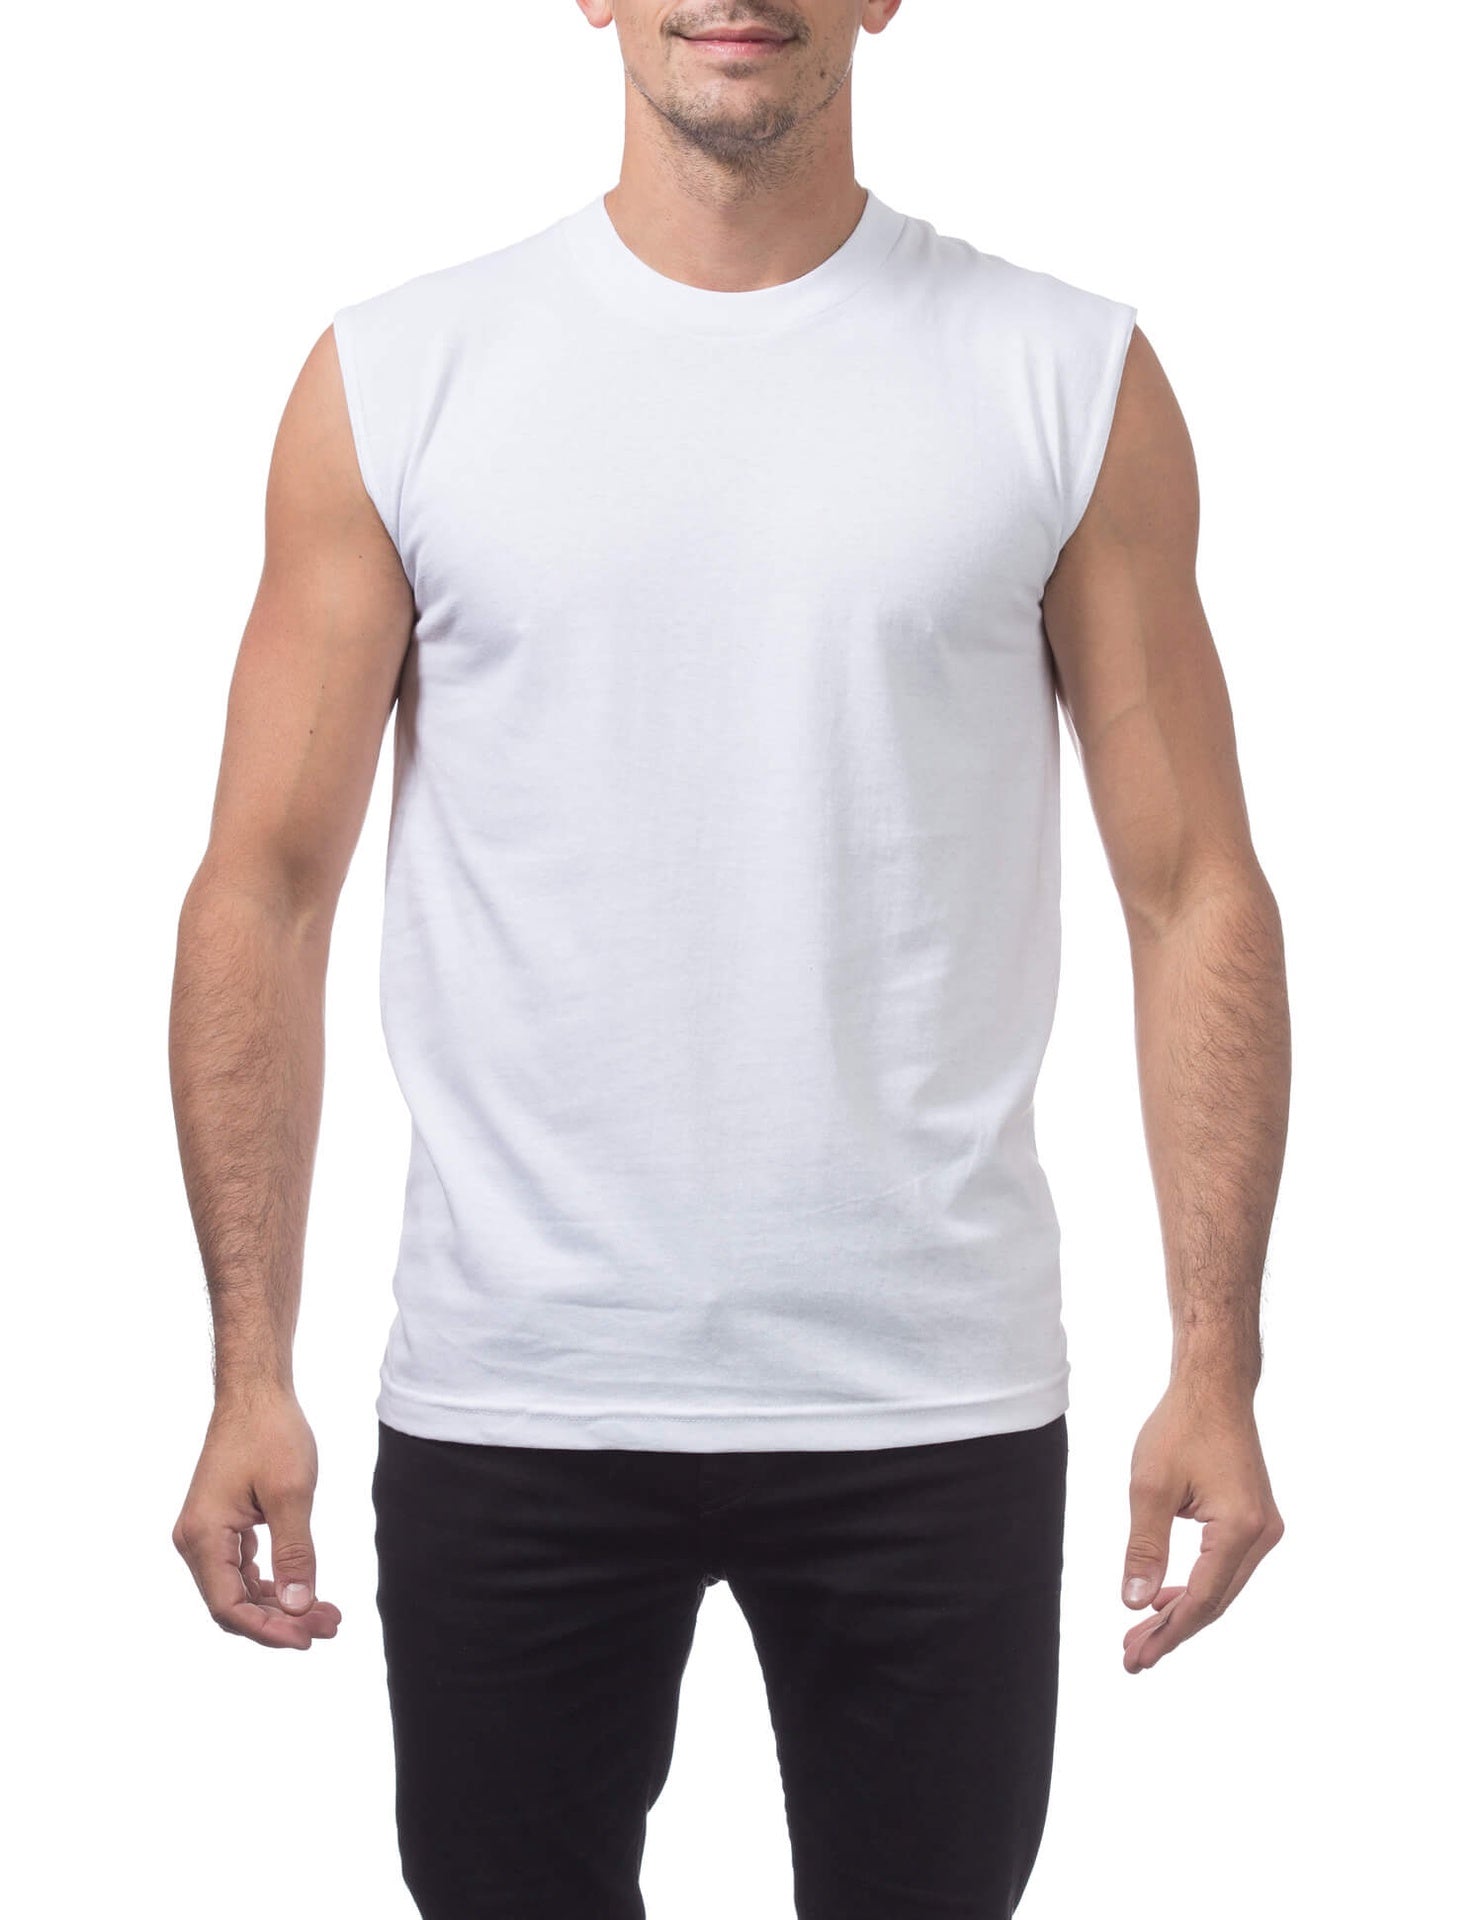 Pro Club Comfort Muscle Tee - WHITE